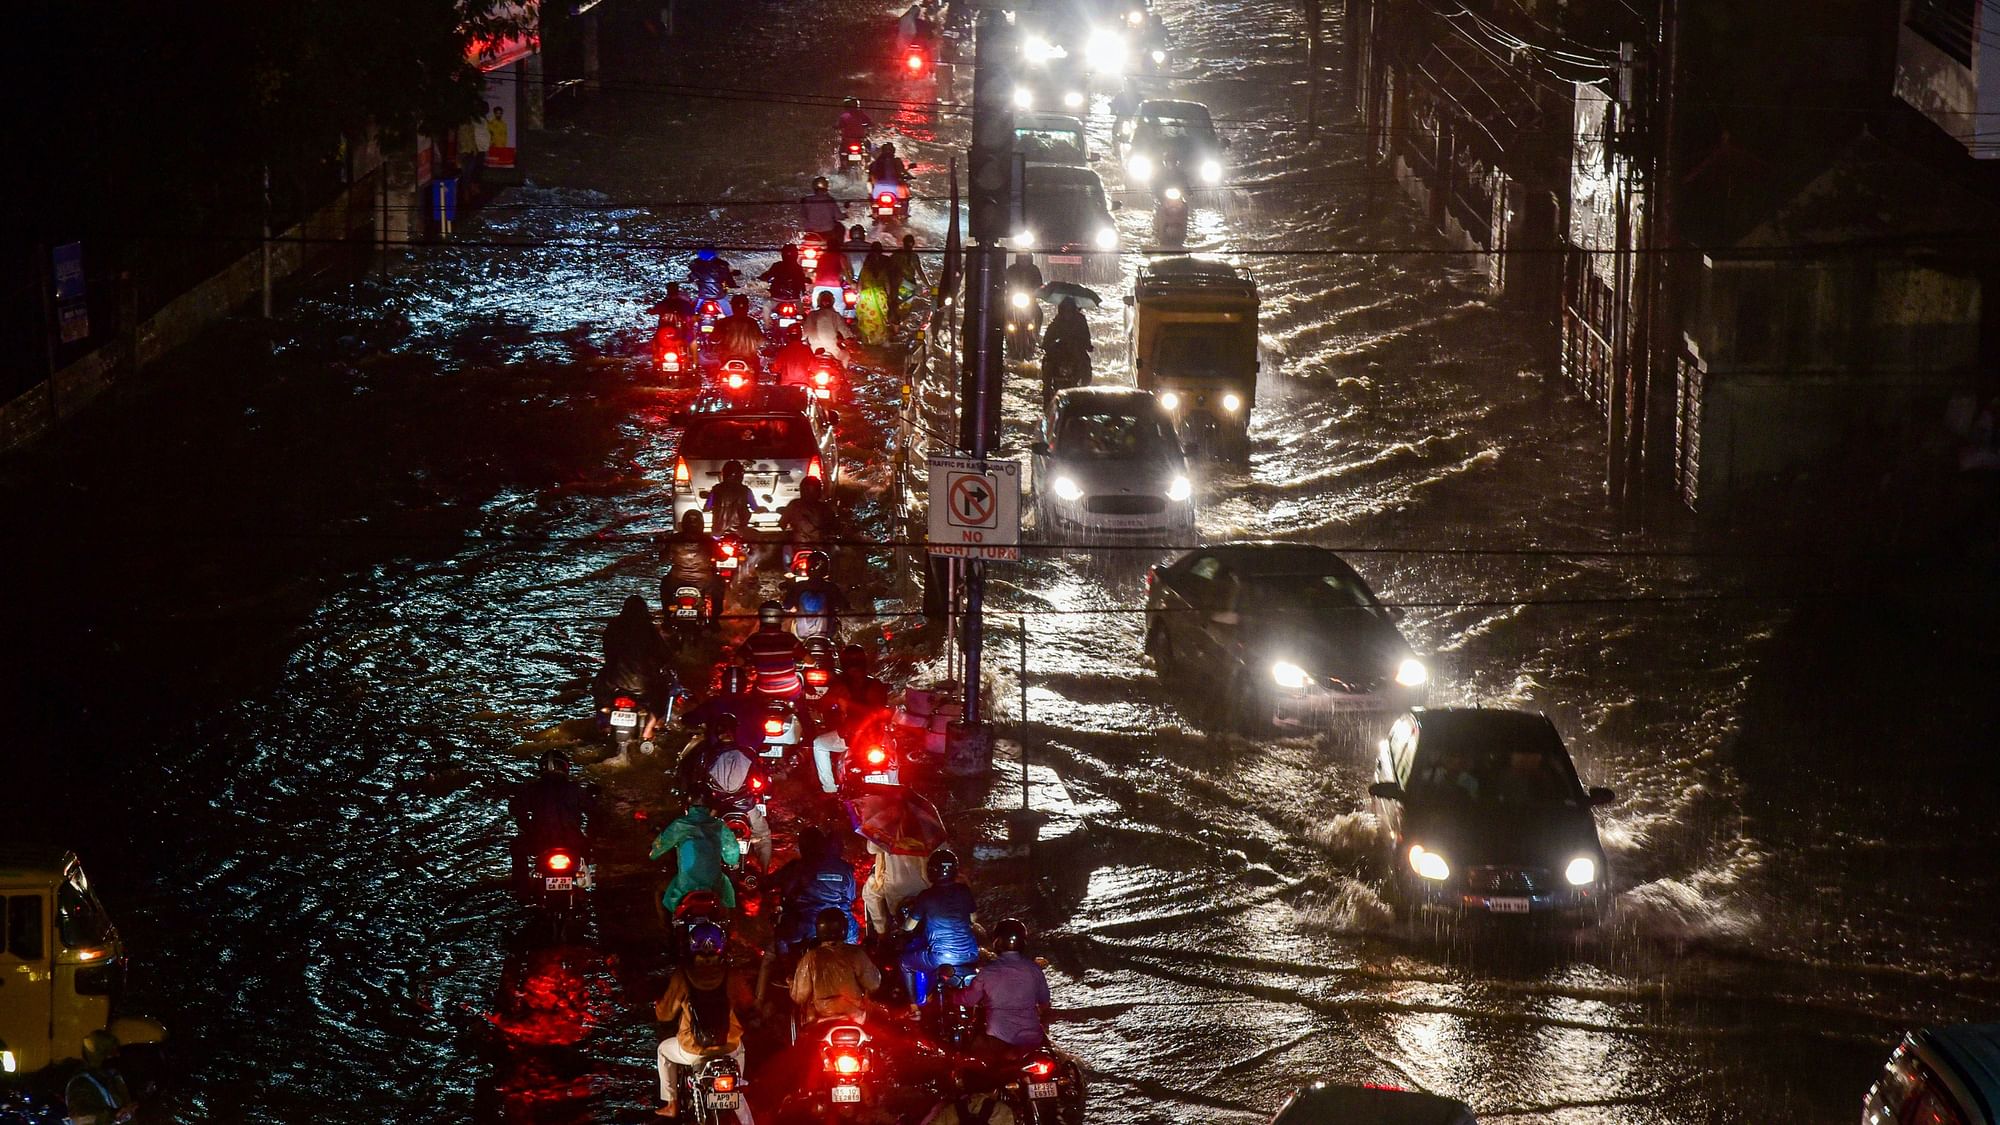 Vehicles ply on a waterlogged street, in Hyderabad, on Saturday. Image used for representational purpose only.